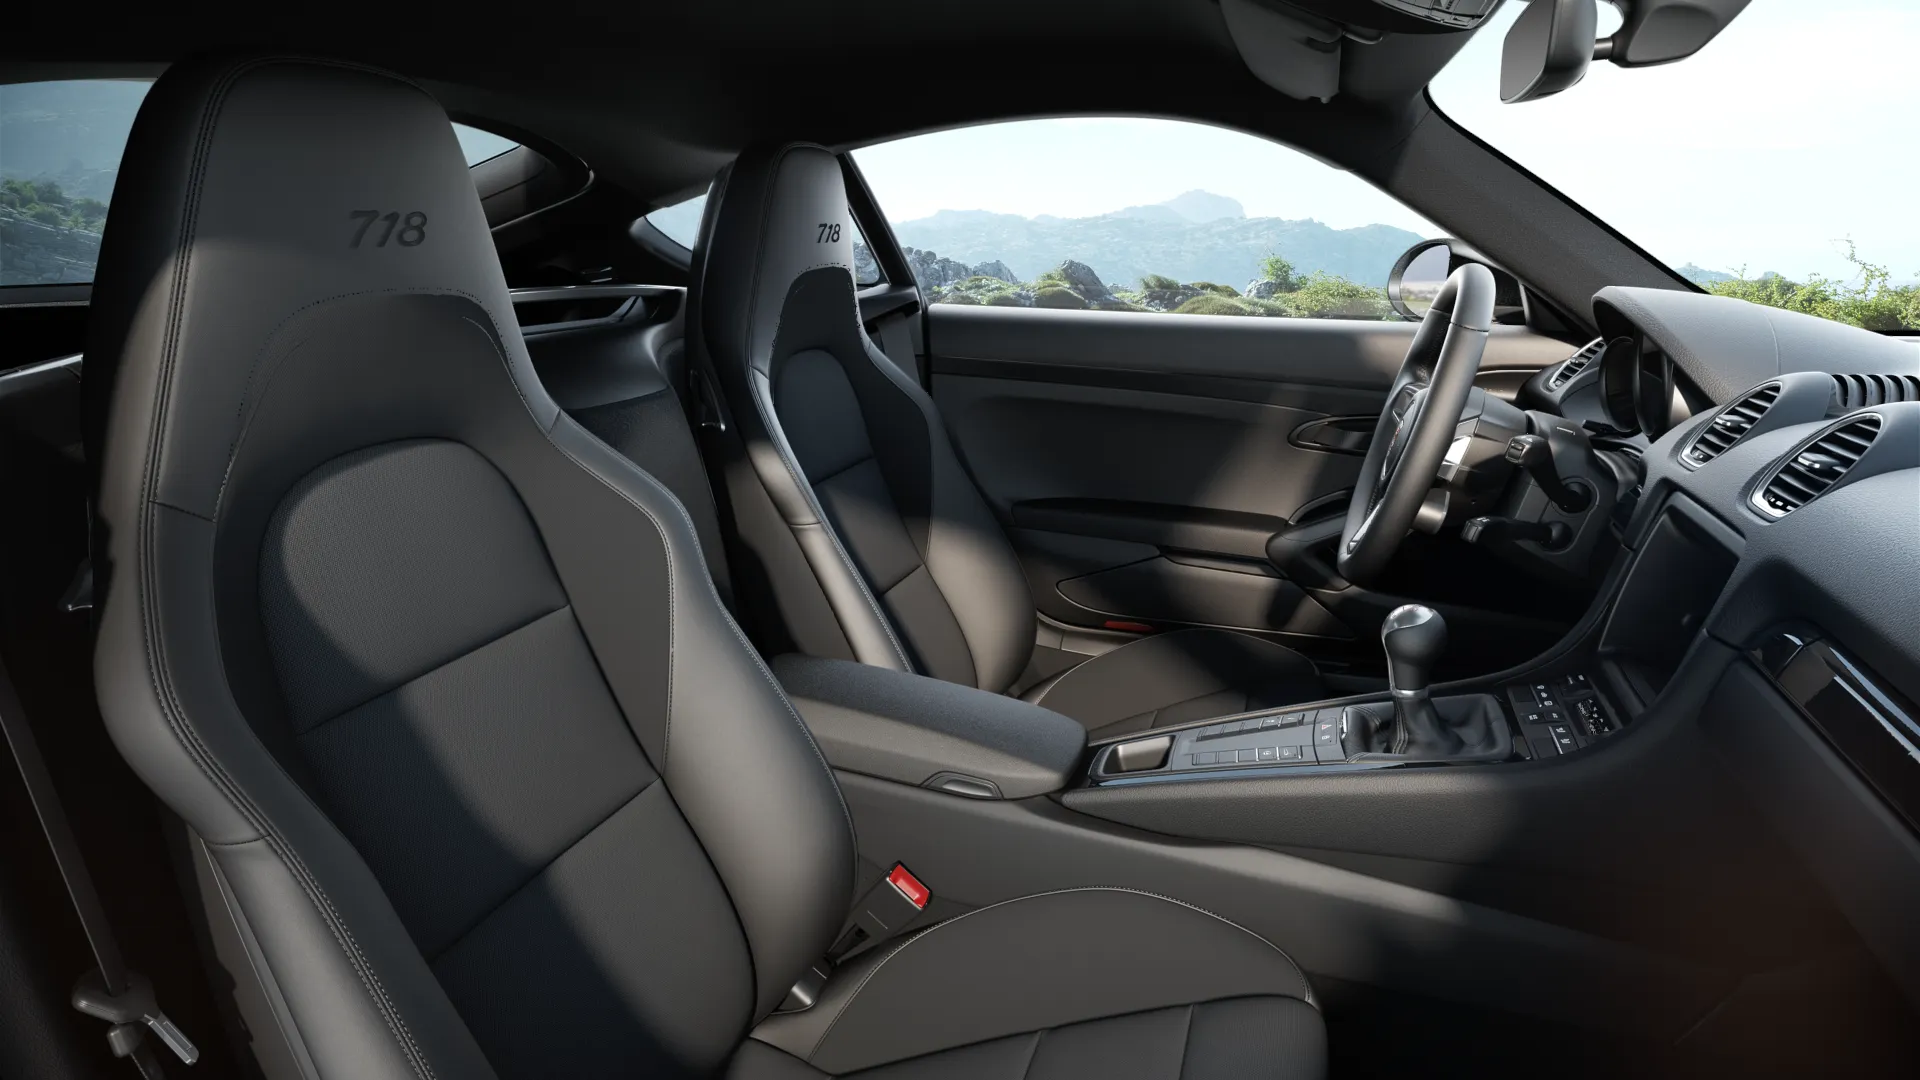 Interior view of 718 Cayman T